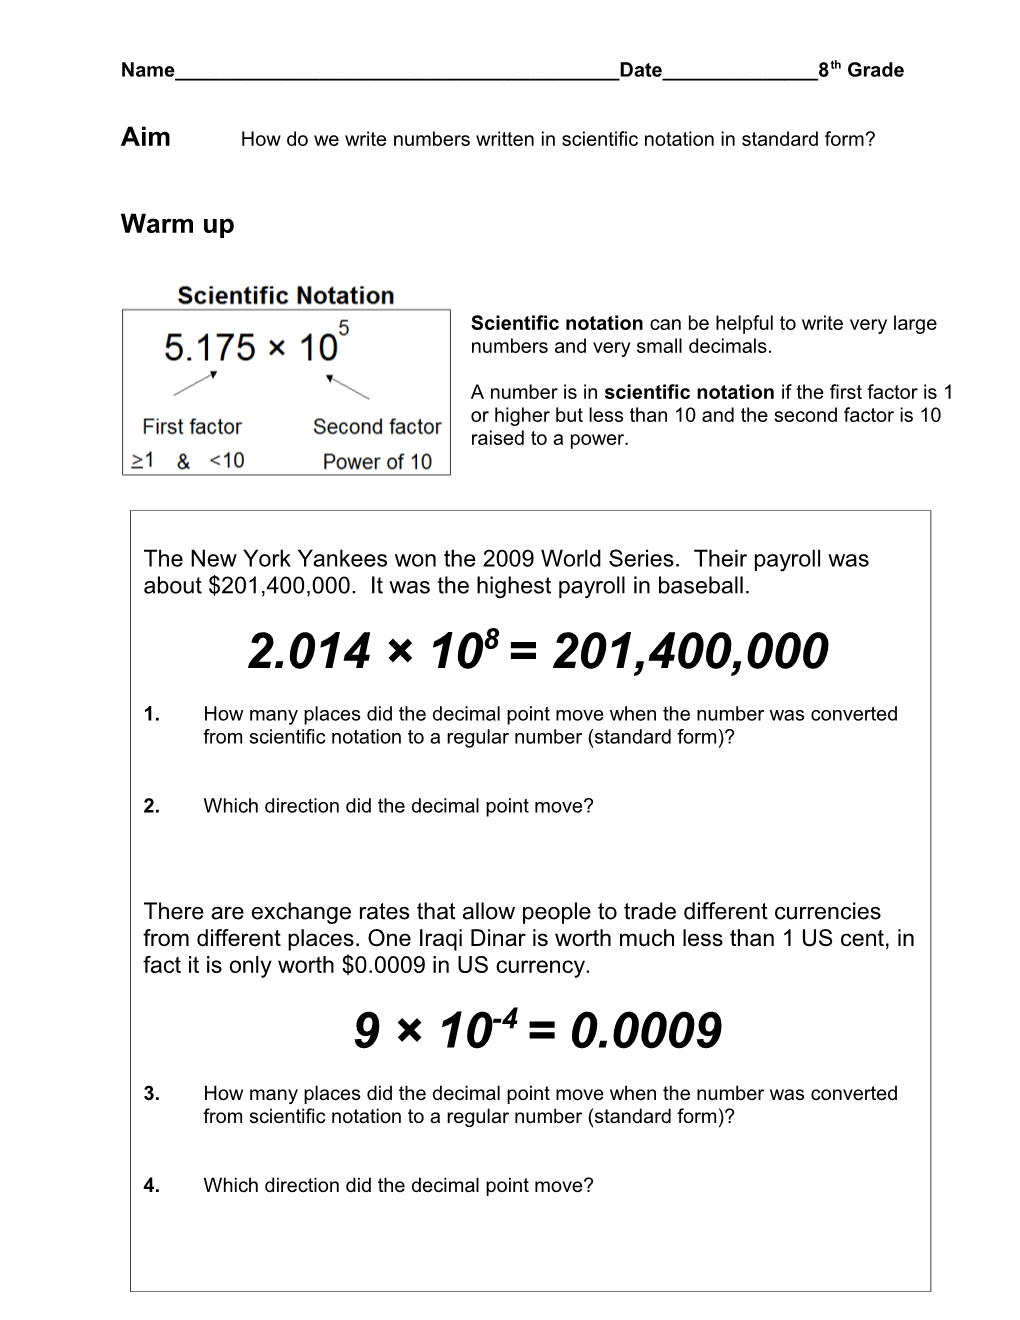 Changing Numbers from Scientific Notation to Standard Form